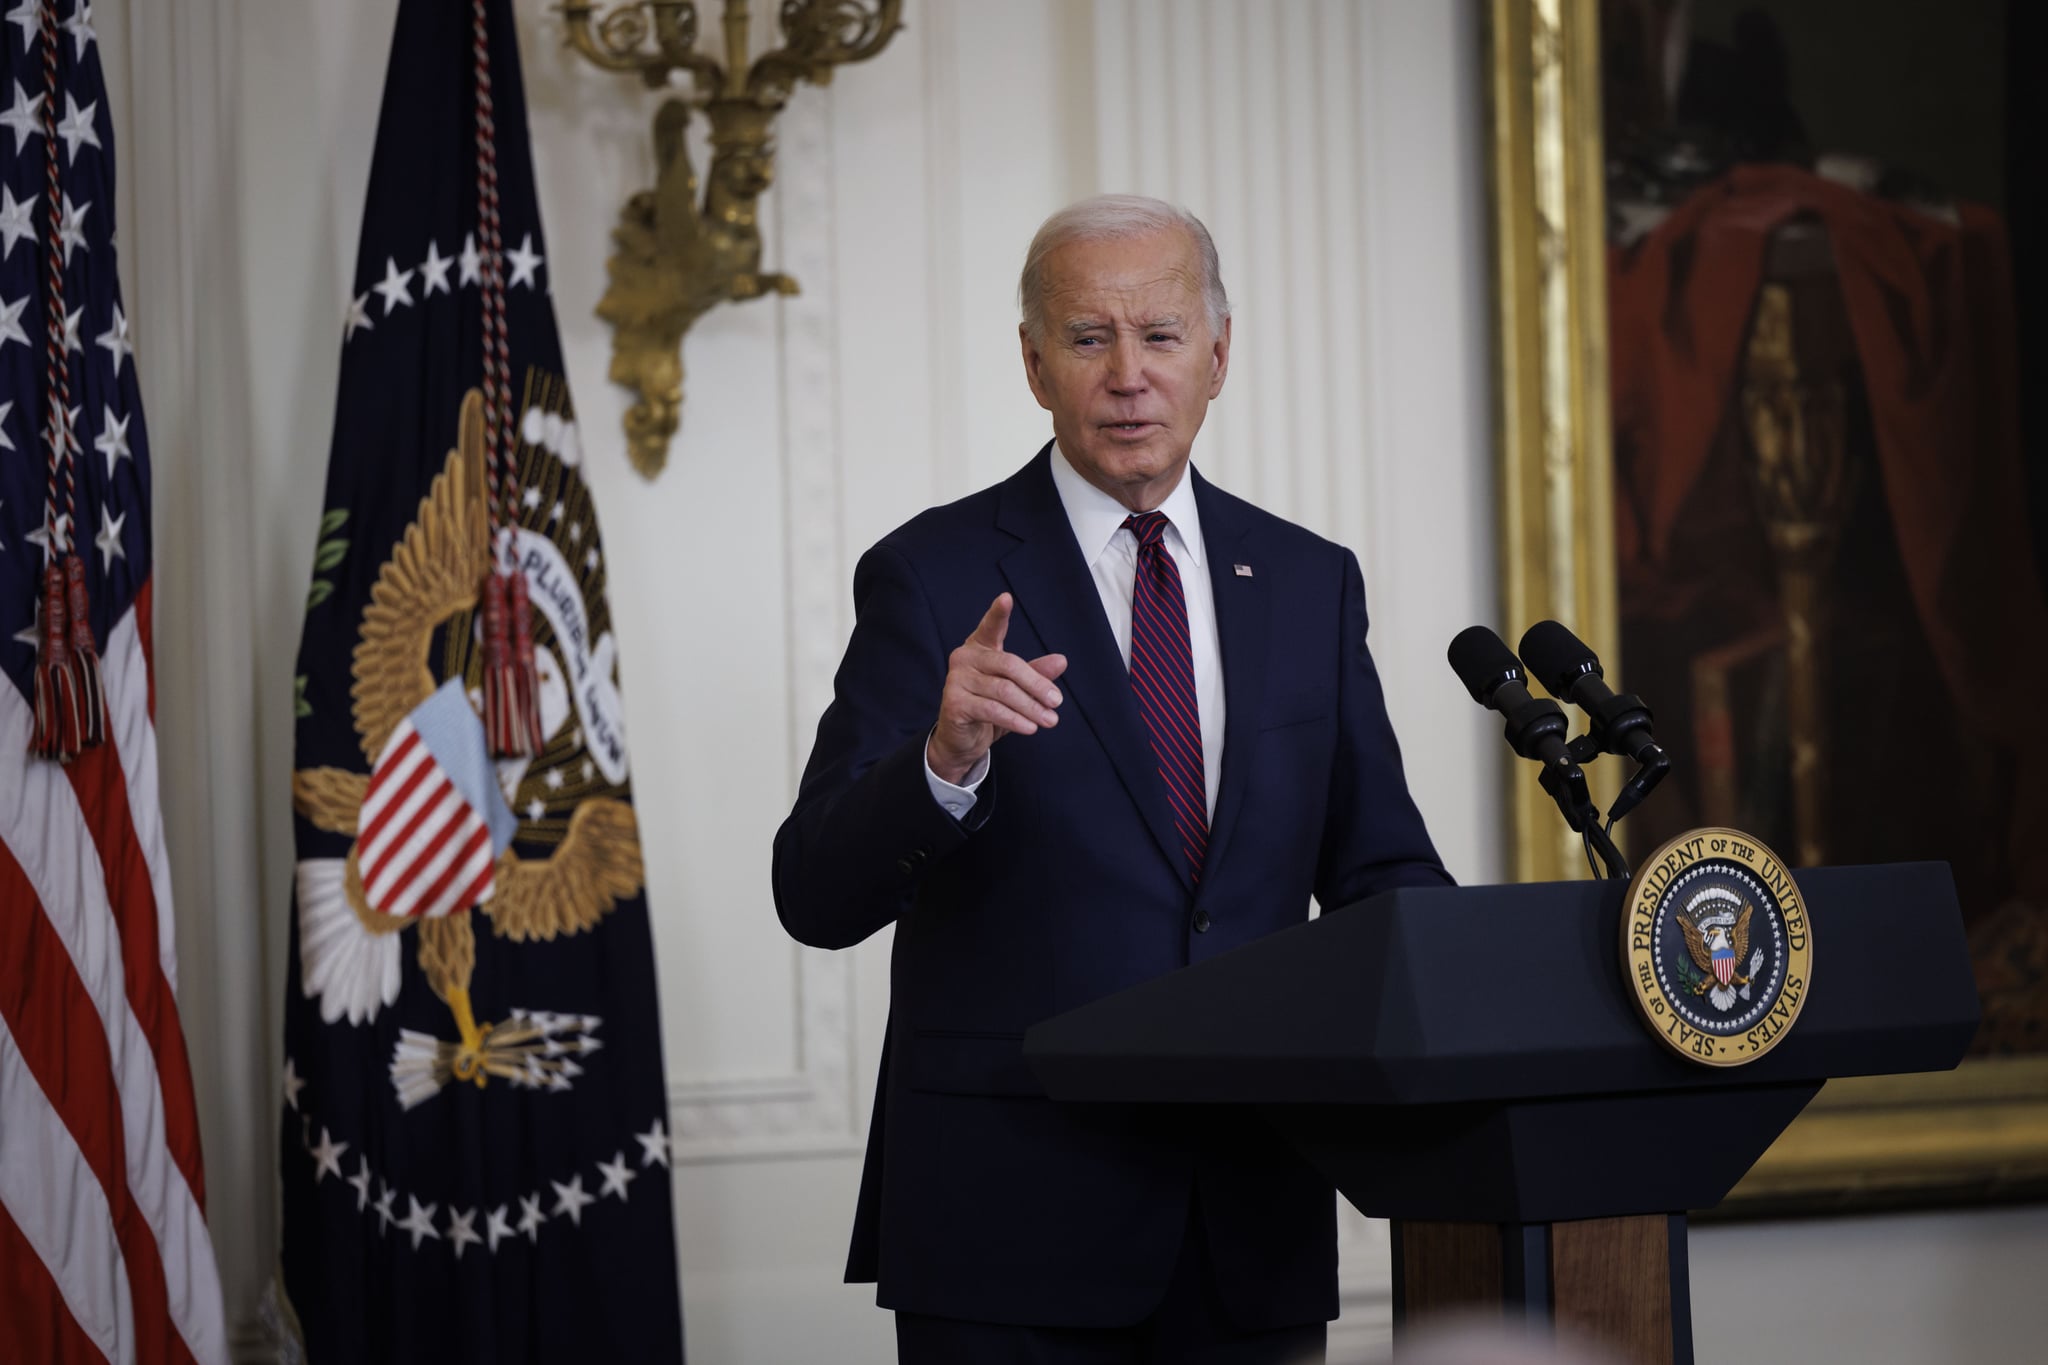 US President Joe Biden speaks during an event with a bipartisan group of mayors in the East Room of the White House in Washington, DC, US, on Friday, Jan. 19, 2024. Border management has become an undeniable political burden for Biden, with Republicans continuing to attack the administration for its policies and Democratic mayors complaining about inadequate resources to manage migrants who've dispersed to their cities. Photographer: Ting Shen/Bloomberg via Getty Images